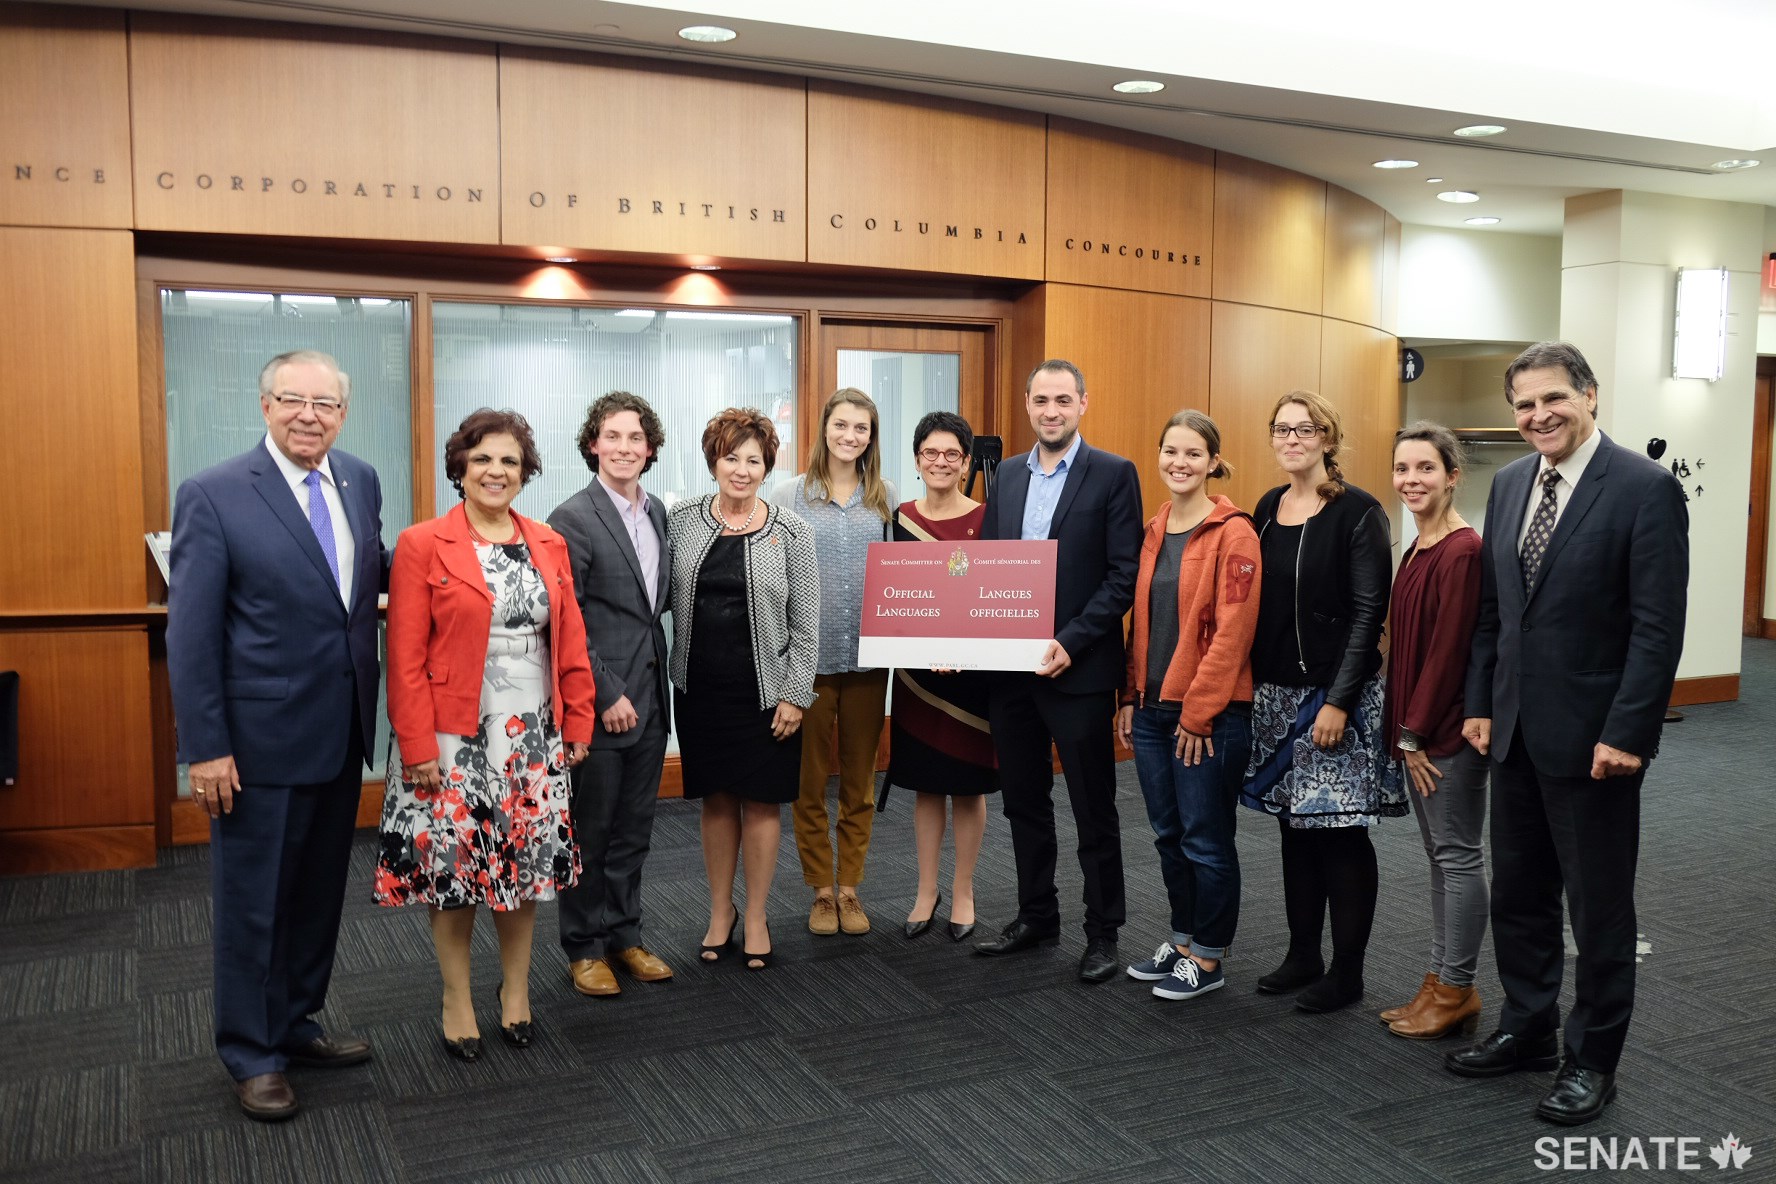 Members of the Senate Committee on Official Languages meet with students as part of the committee's November 2016 fact-finding mission to British Columbia.